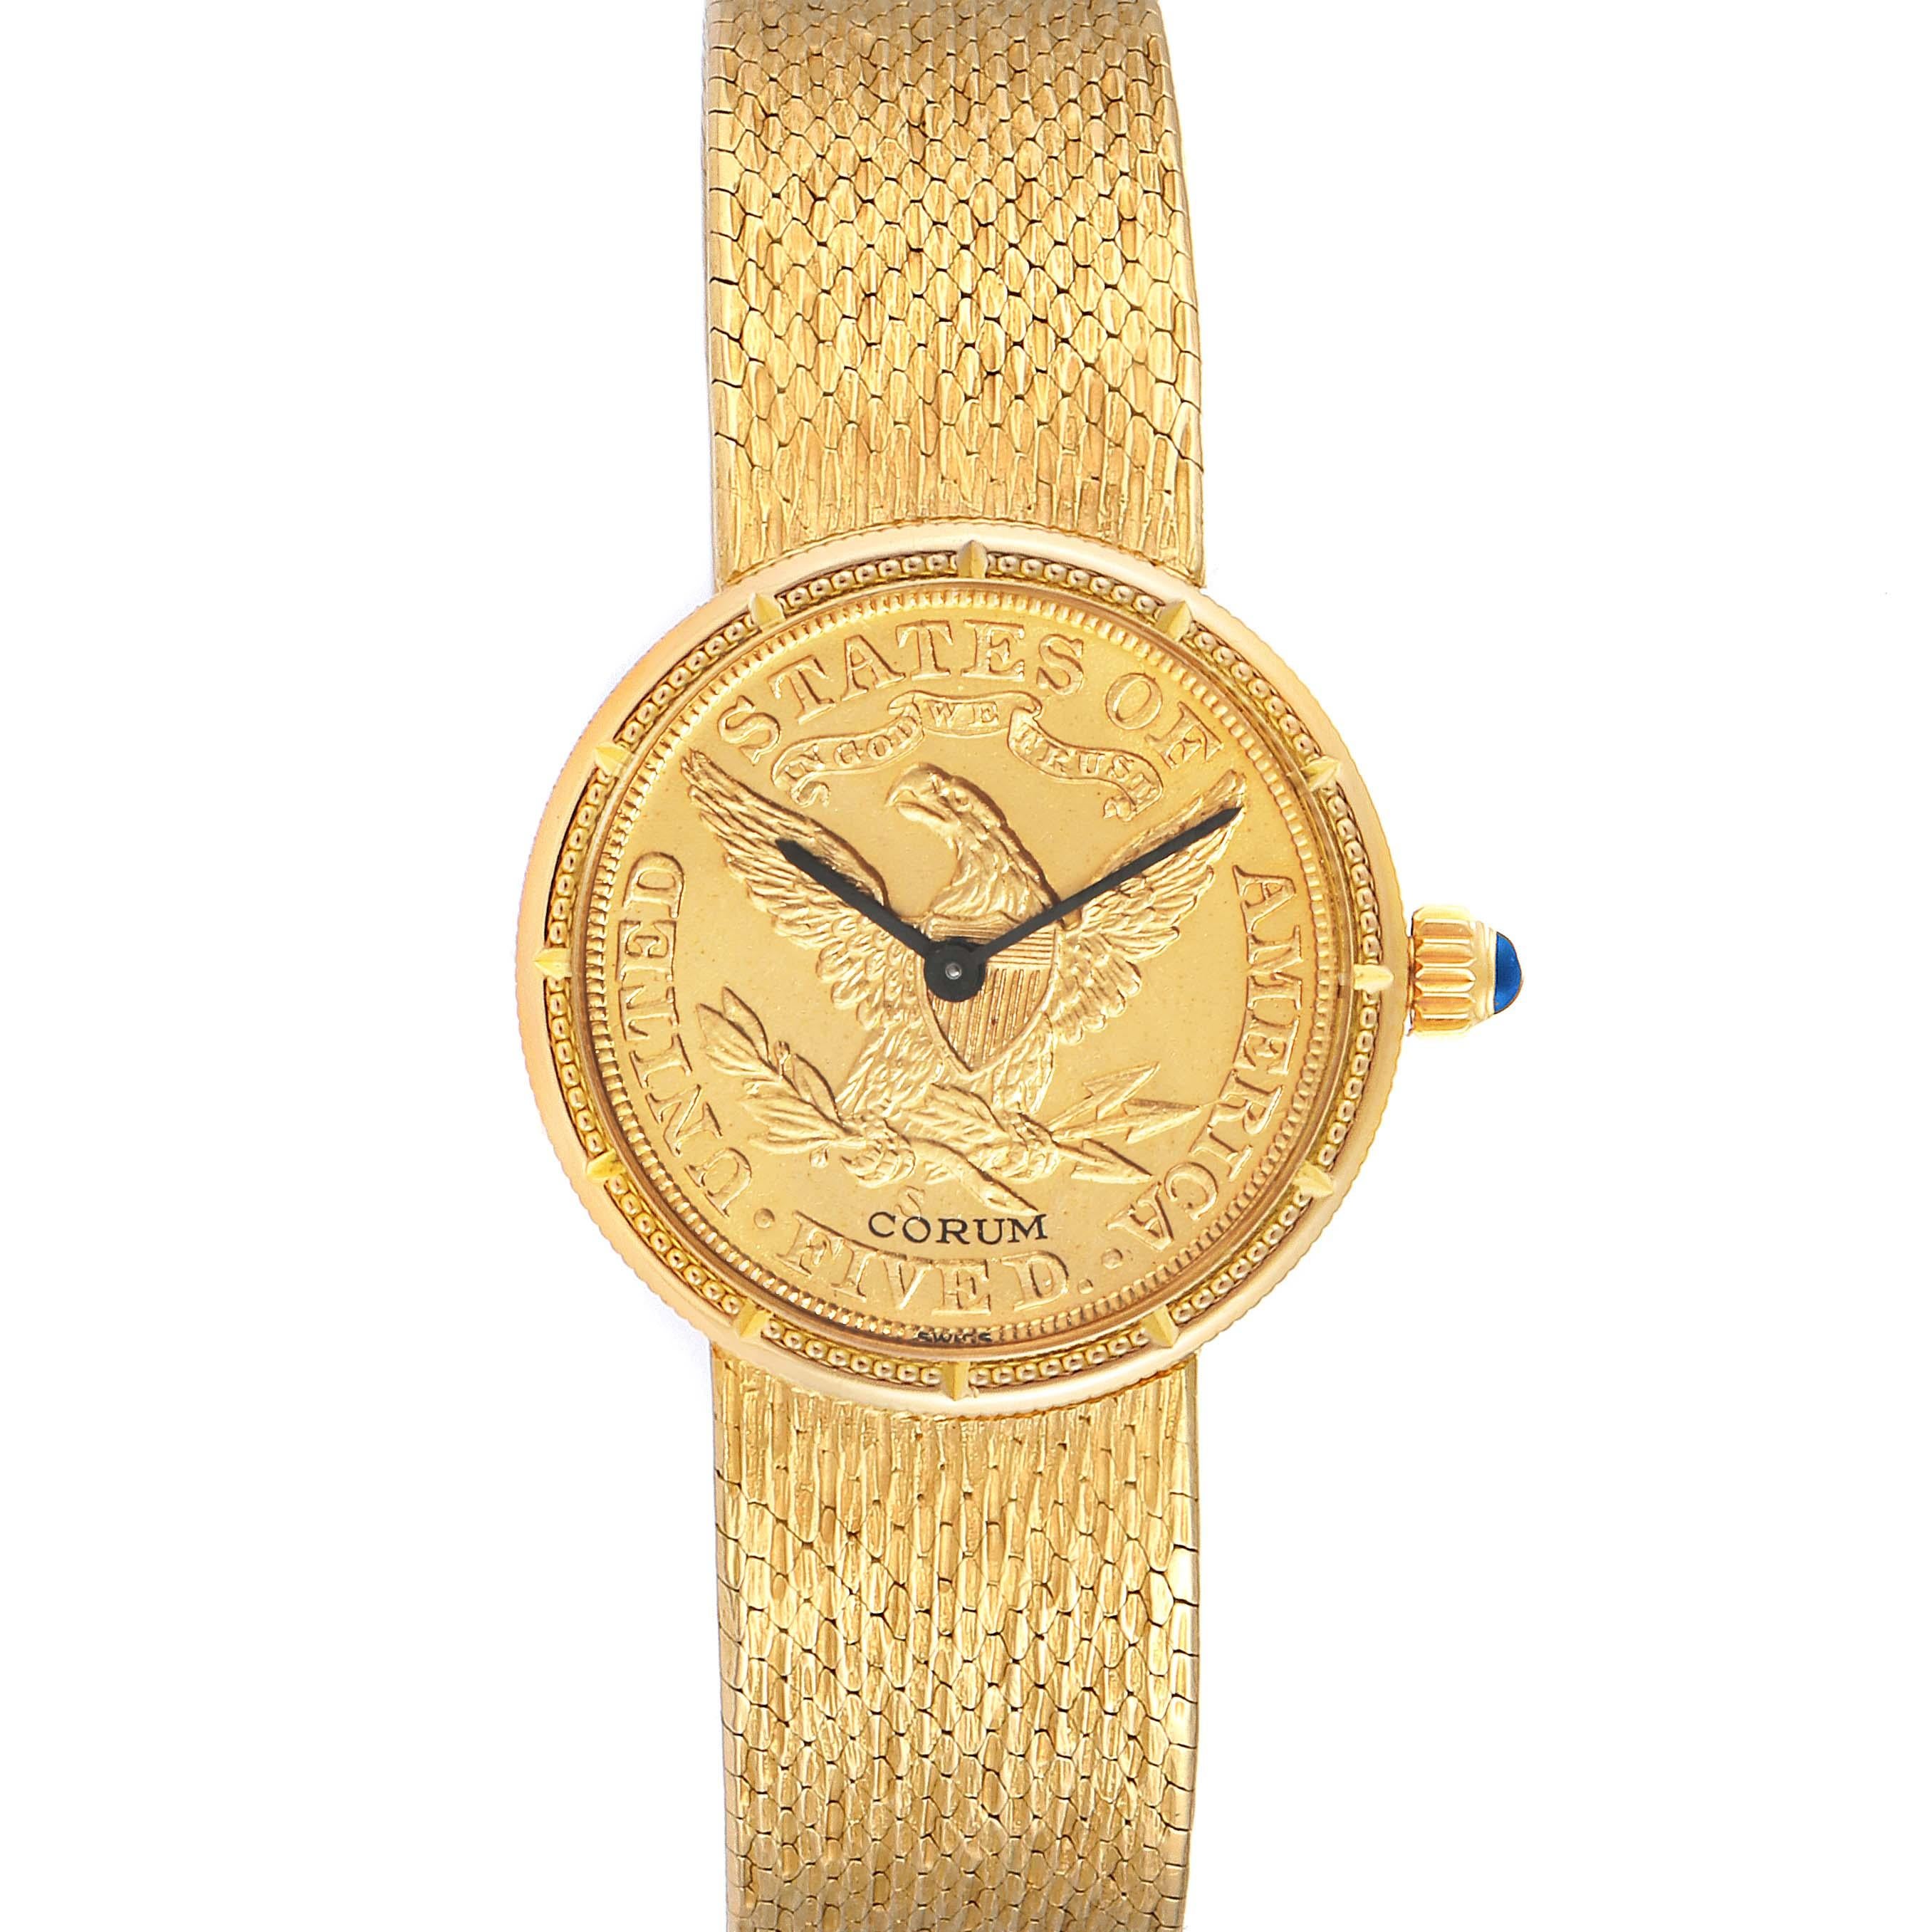 Corum Coin 5 Dollars Double Eagle Yellow Gold Ladies Watch 1902. Manual winding movement. 18k yellow gold case with 22k coin 24 mm in diameter. Coin edge. Circular grained crown. . Mineral glass crystal. 22K coin. Black baton hands. 18k yellow gold